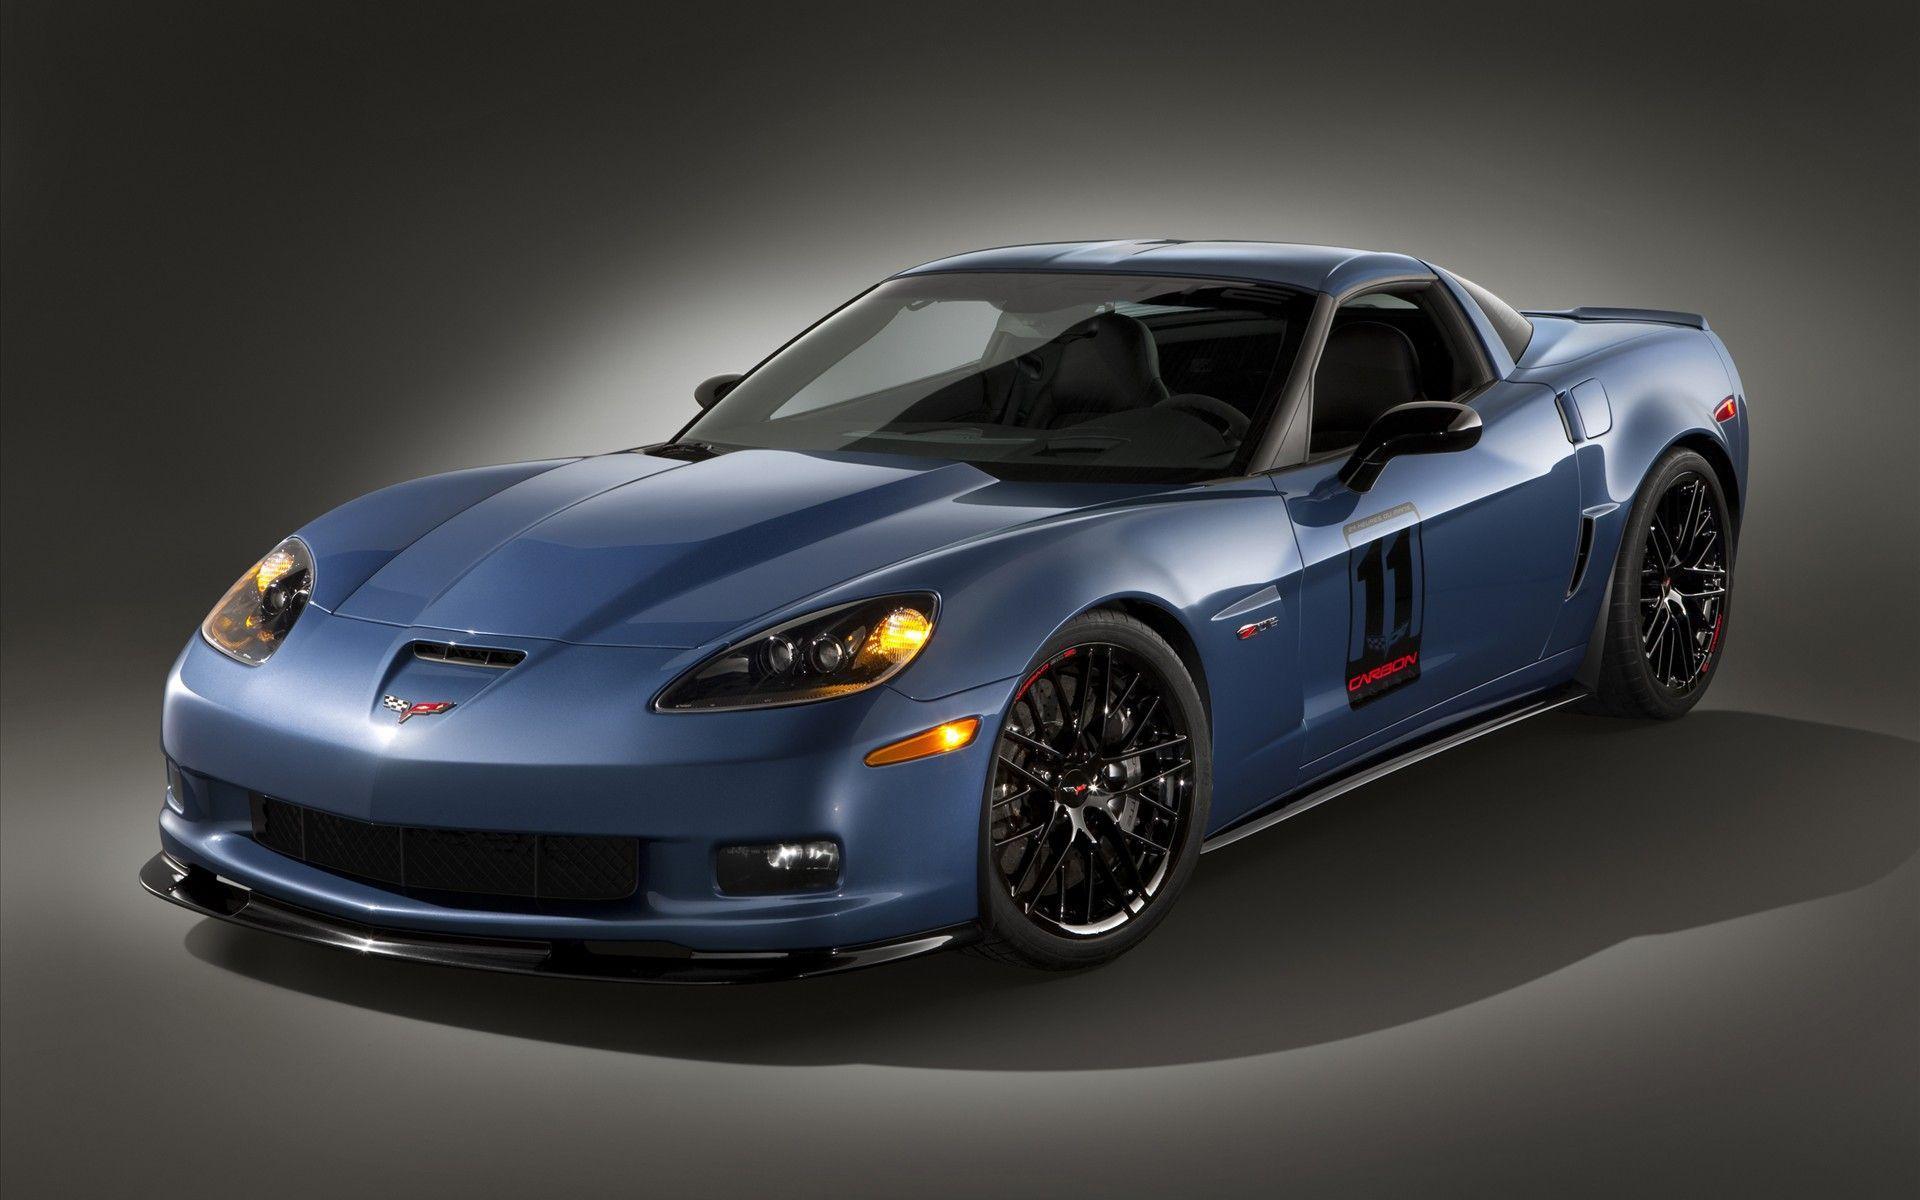 Find Latest 2015 Corvette Hi Resolutions Photo Reviews and New